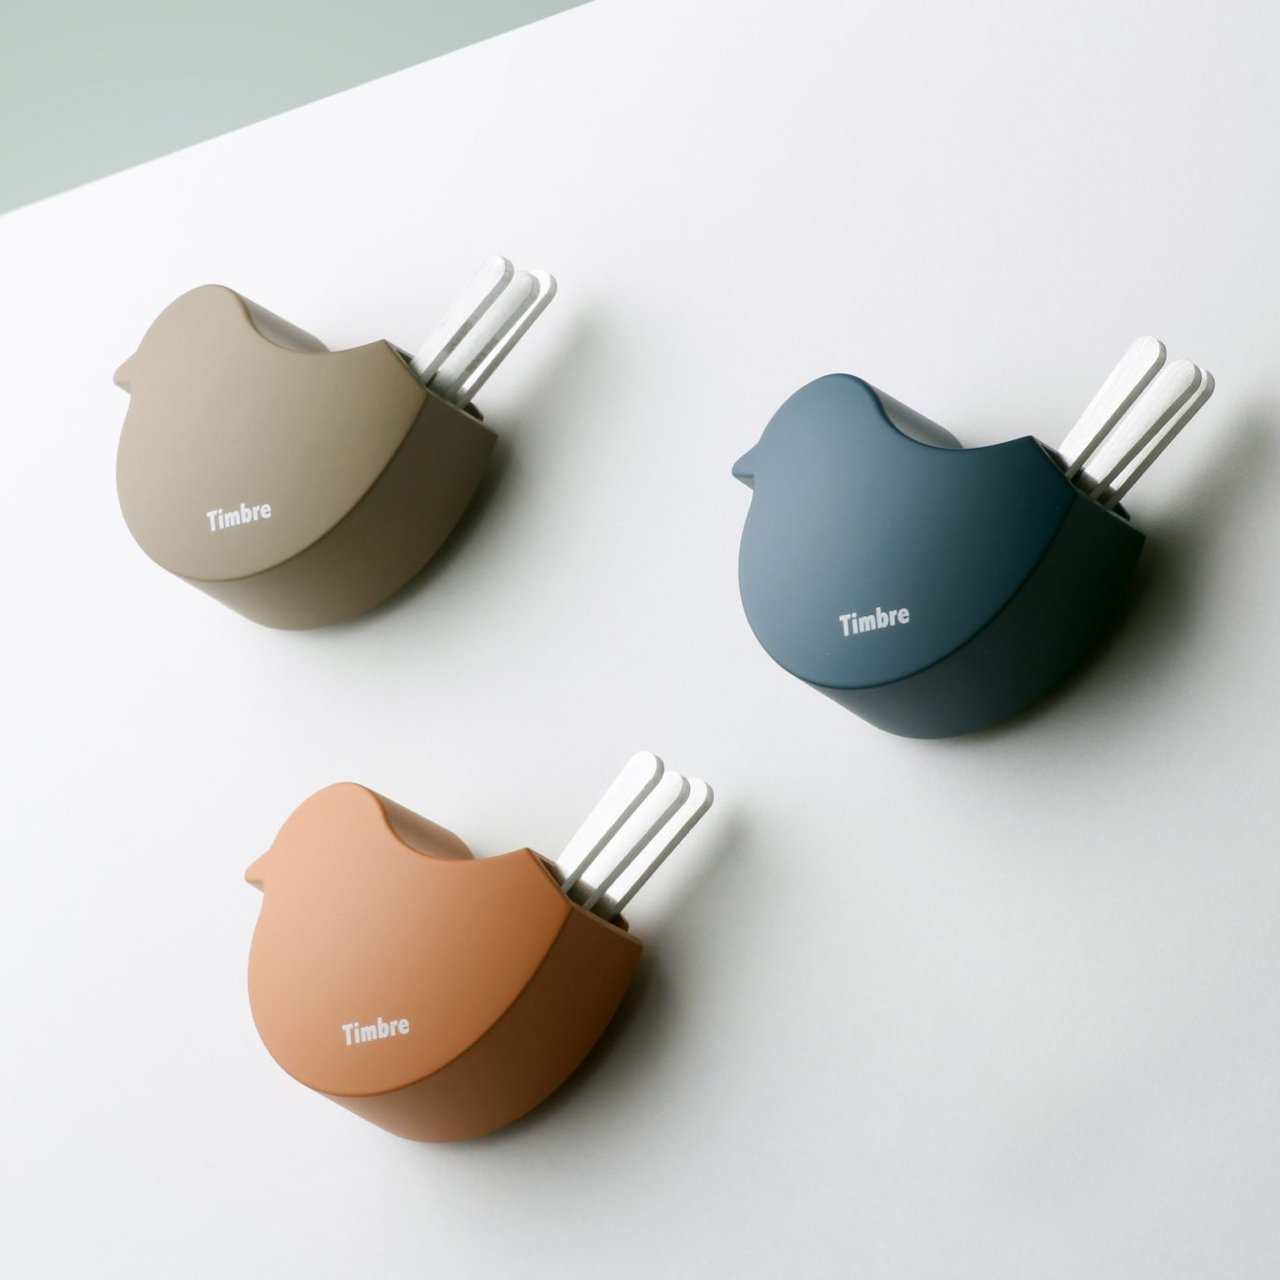 This cute door chime welcomes guests with tranquil notes like a chirpy bird